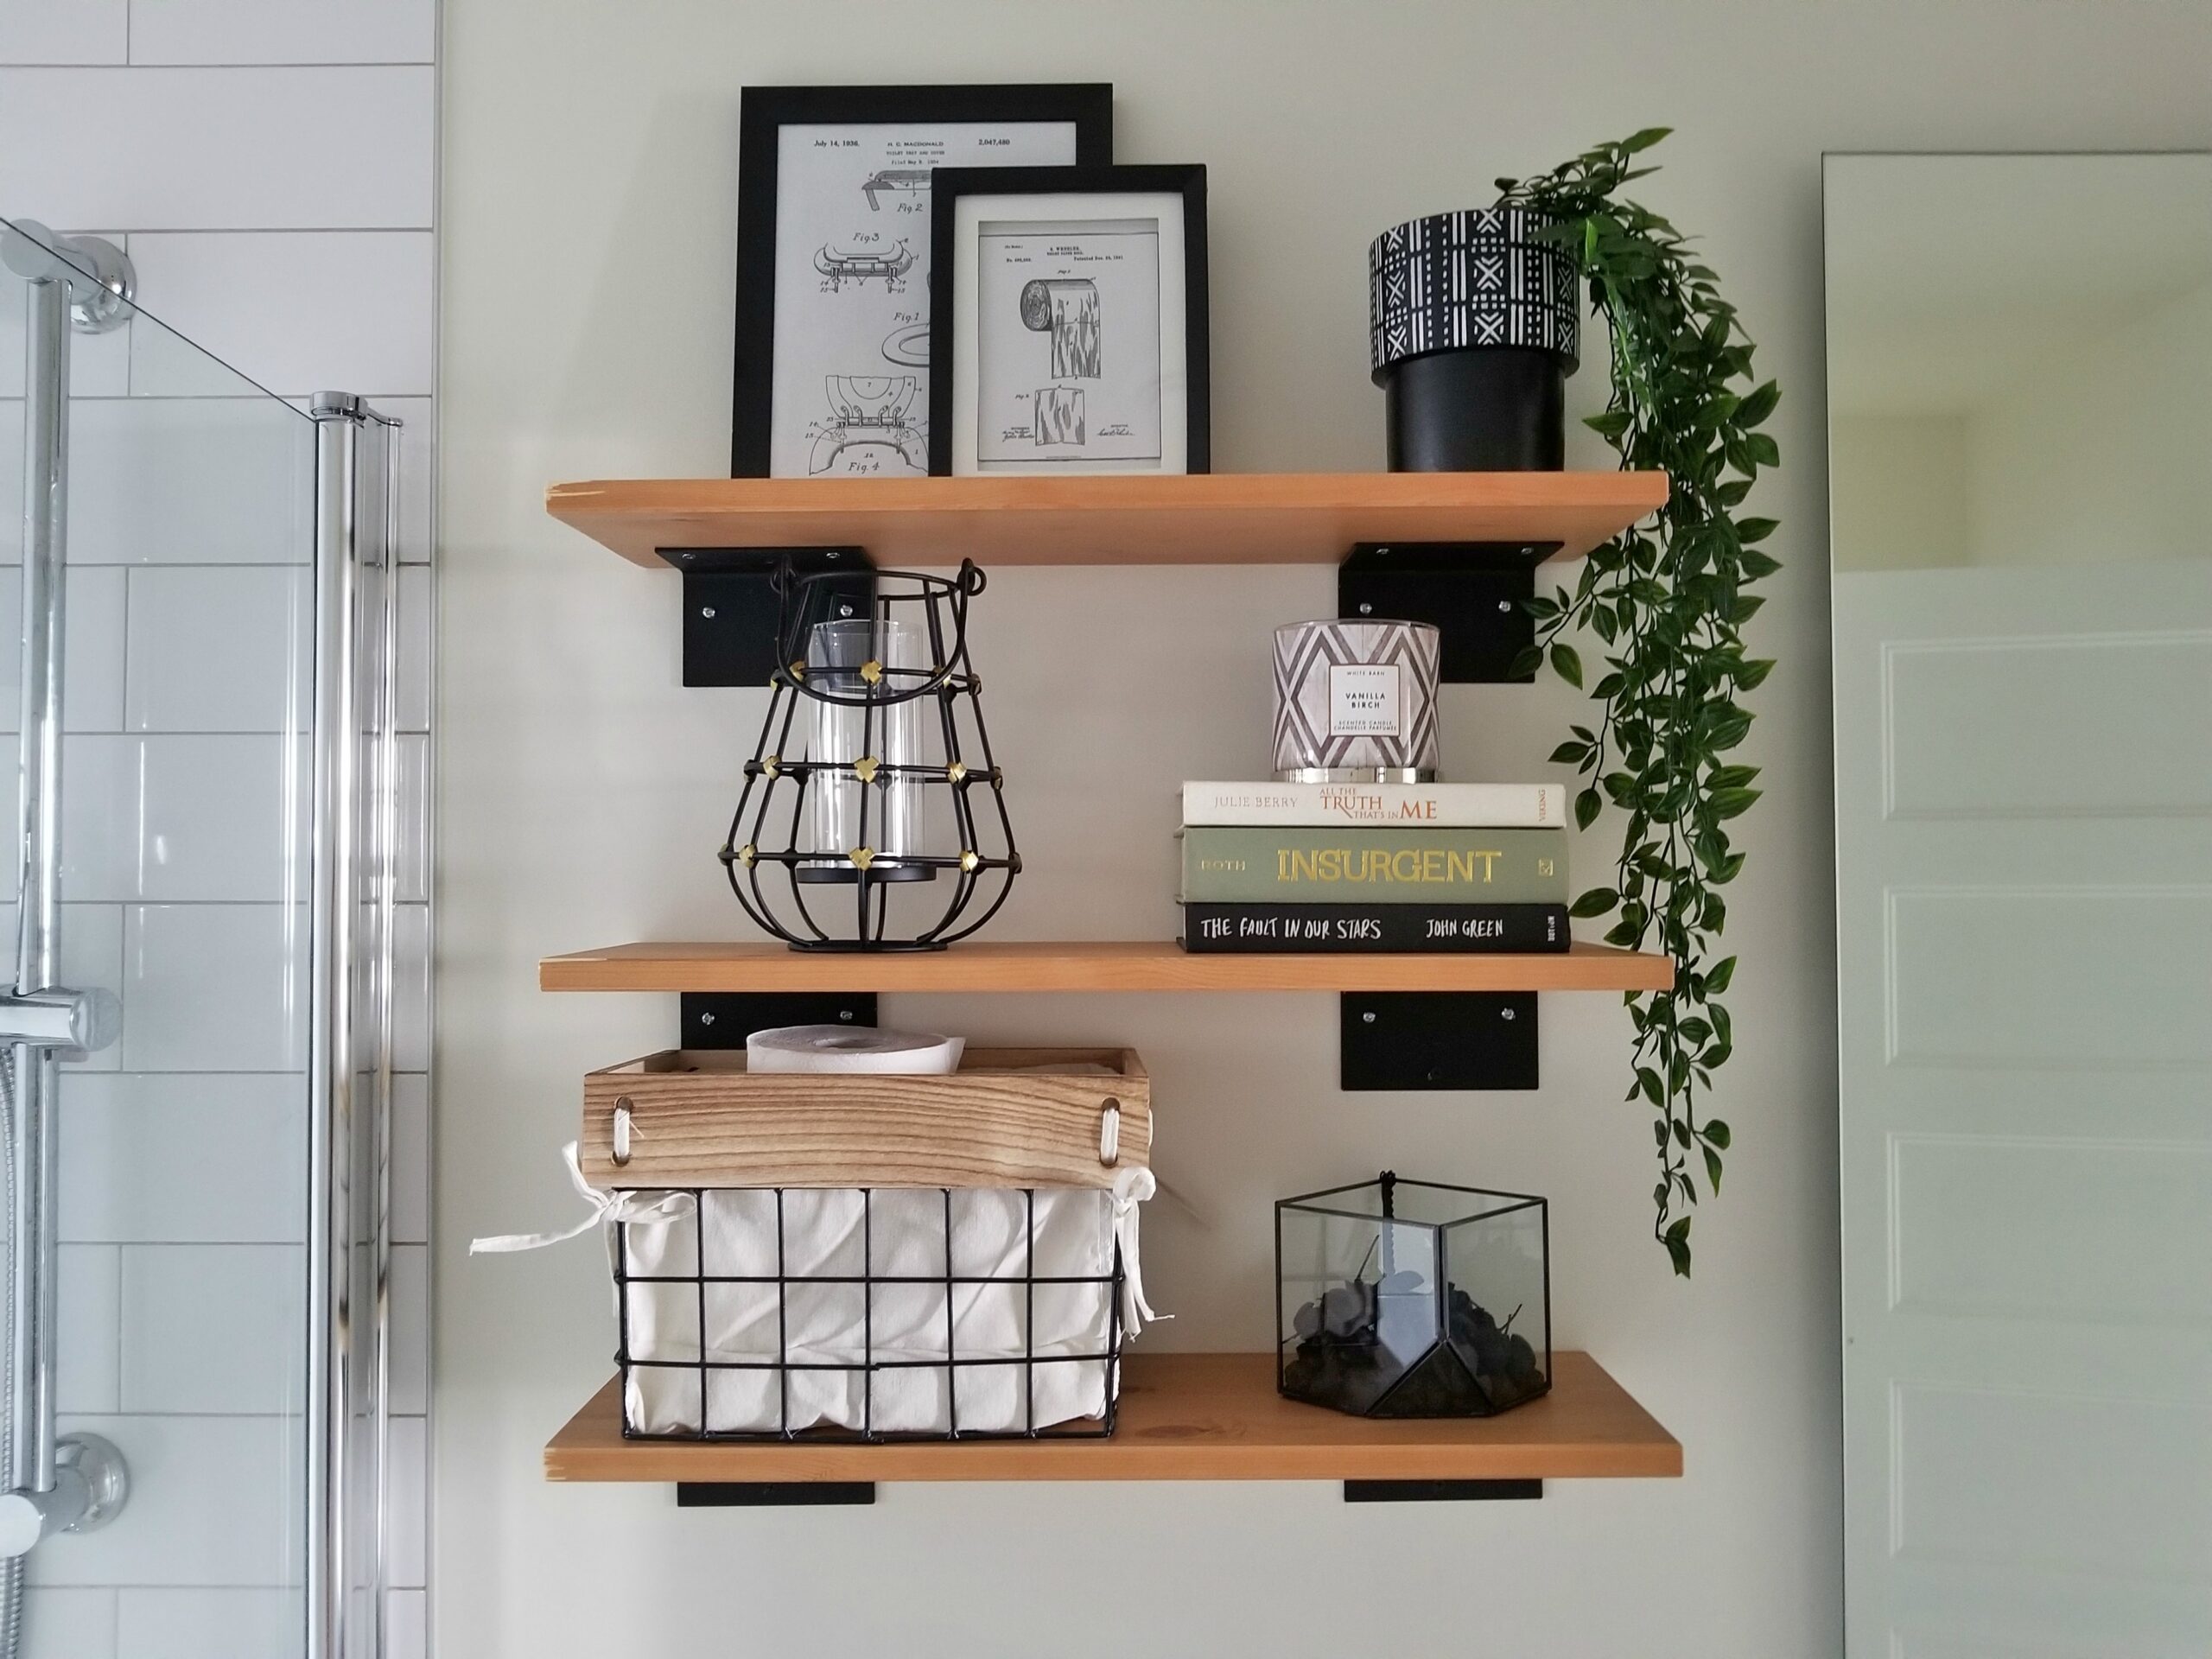 https://www.smallspacedesigner.com/wp-content/uploads/2018/01/How-to-hang-ikea-wall-shelves-scaled.jpg